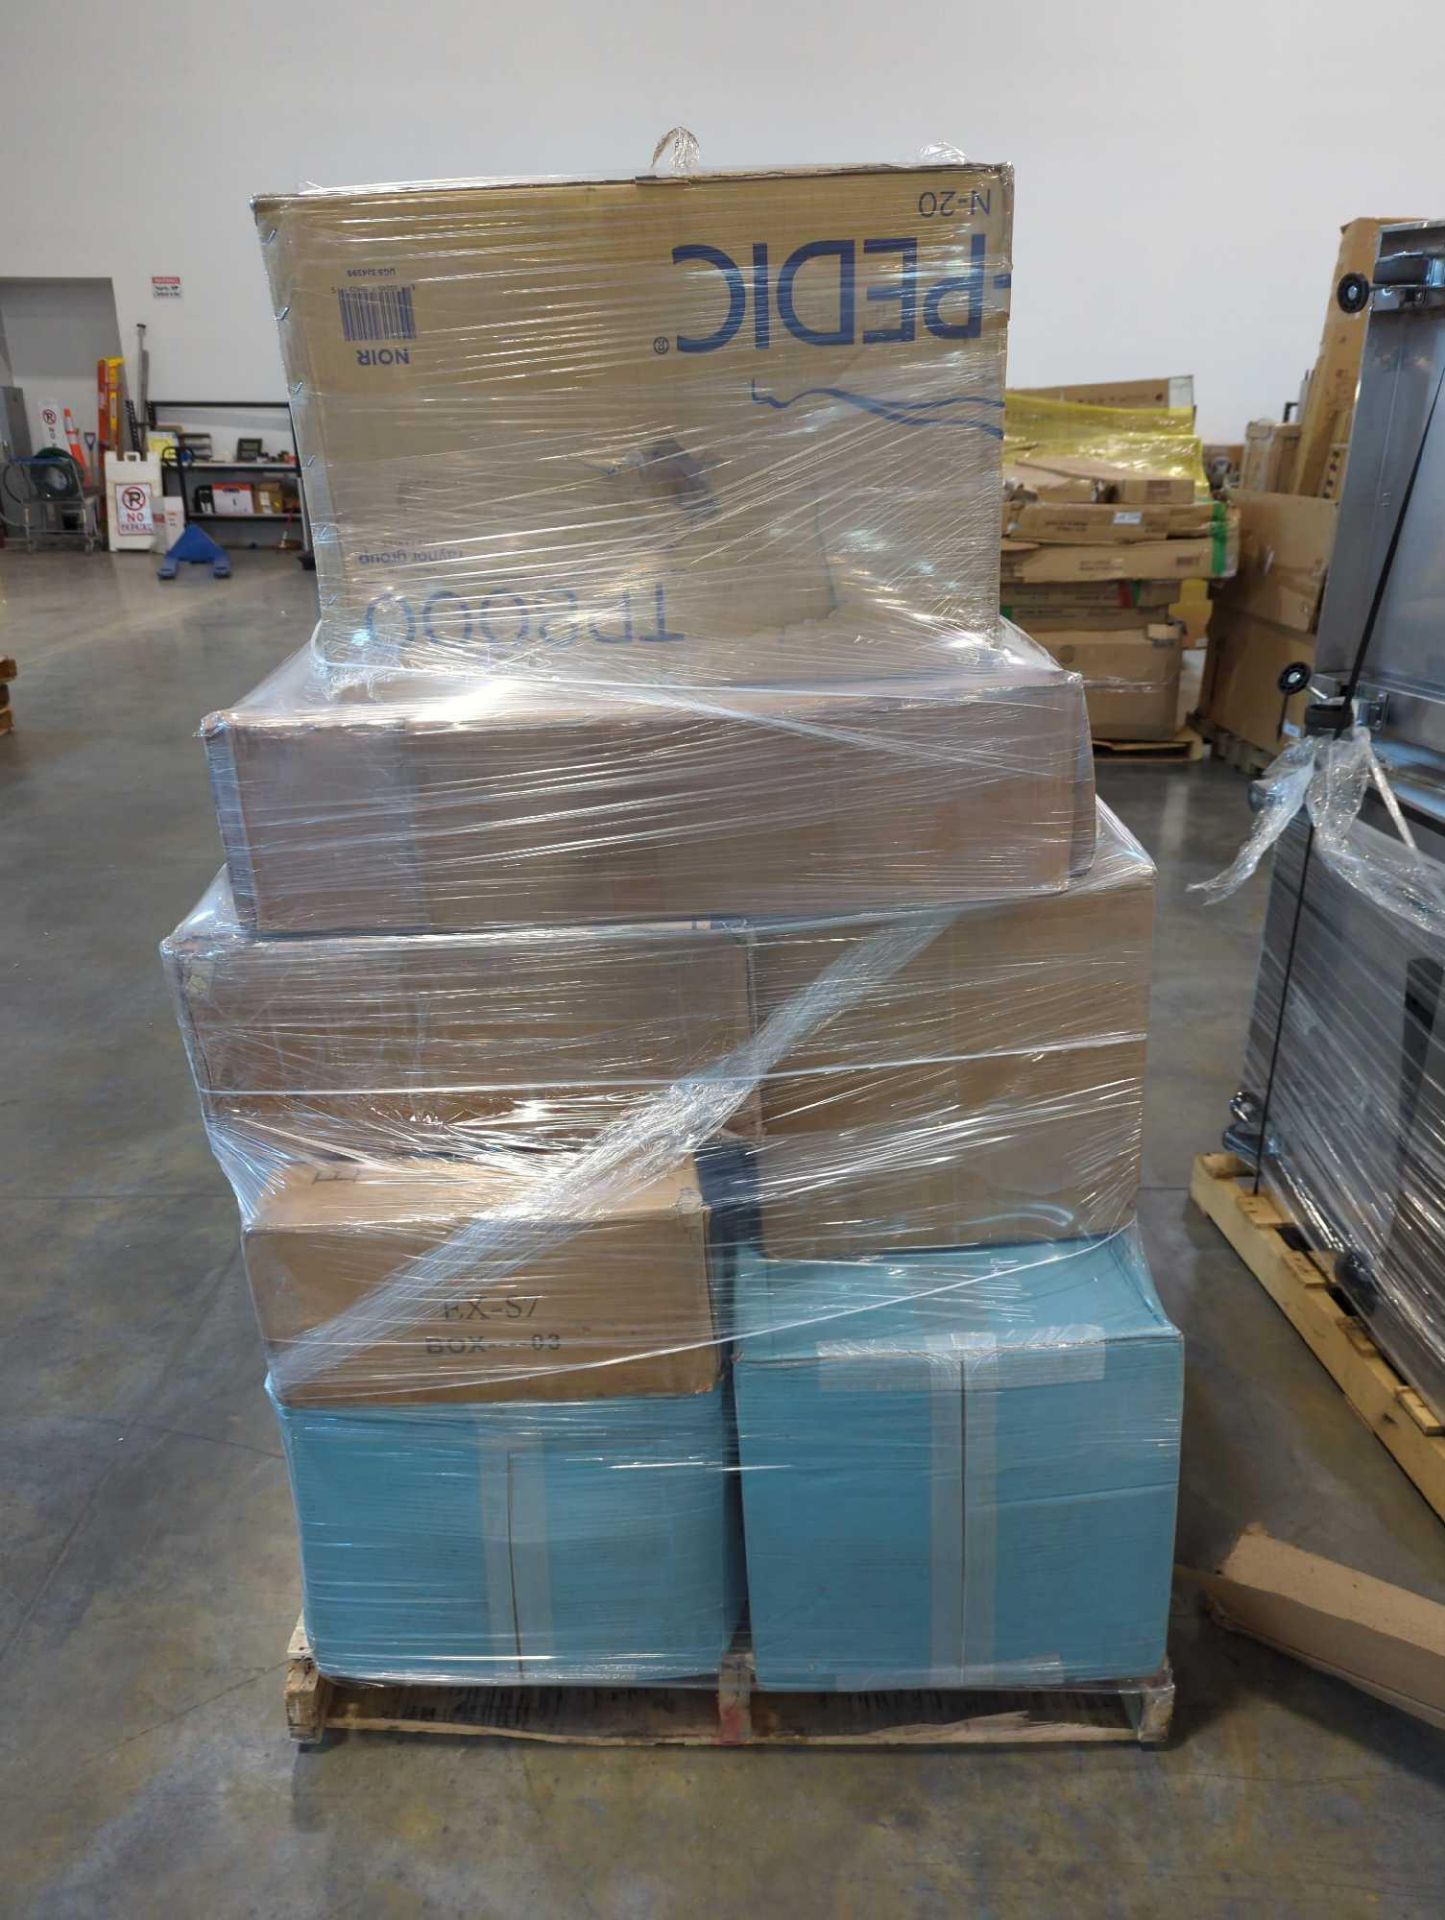 pallet of two sure to sleep mattresses Tempur-Pedic topper and more - Image 5 of 6